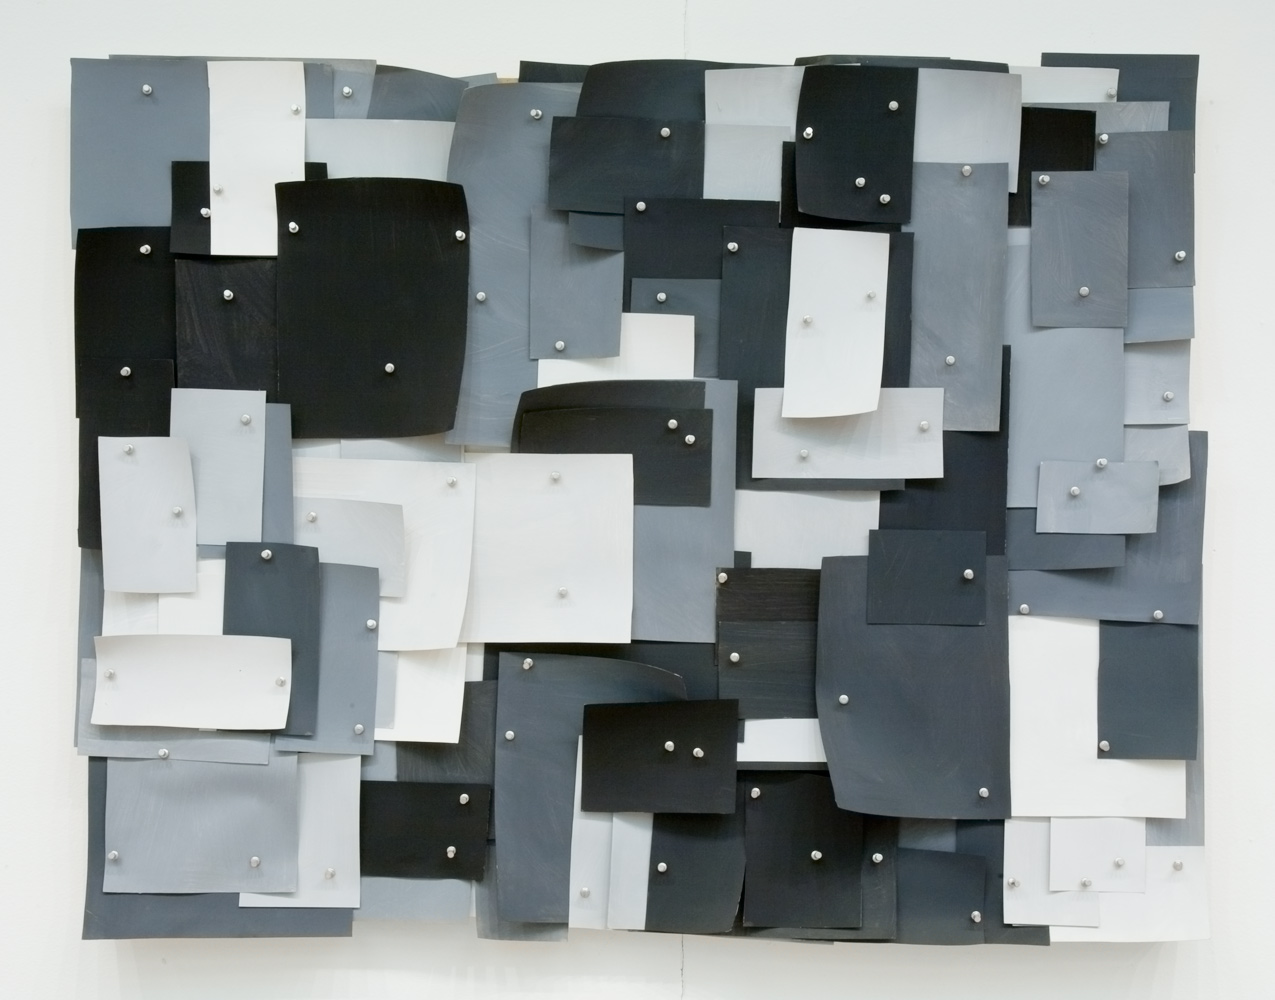 ALLOW, 1996, paint on paper, board, push pins, 37 x 47.5 x 3 inches